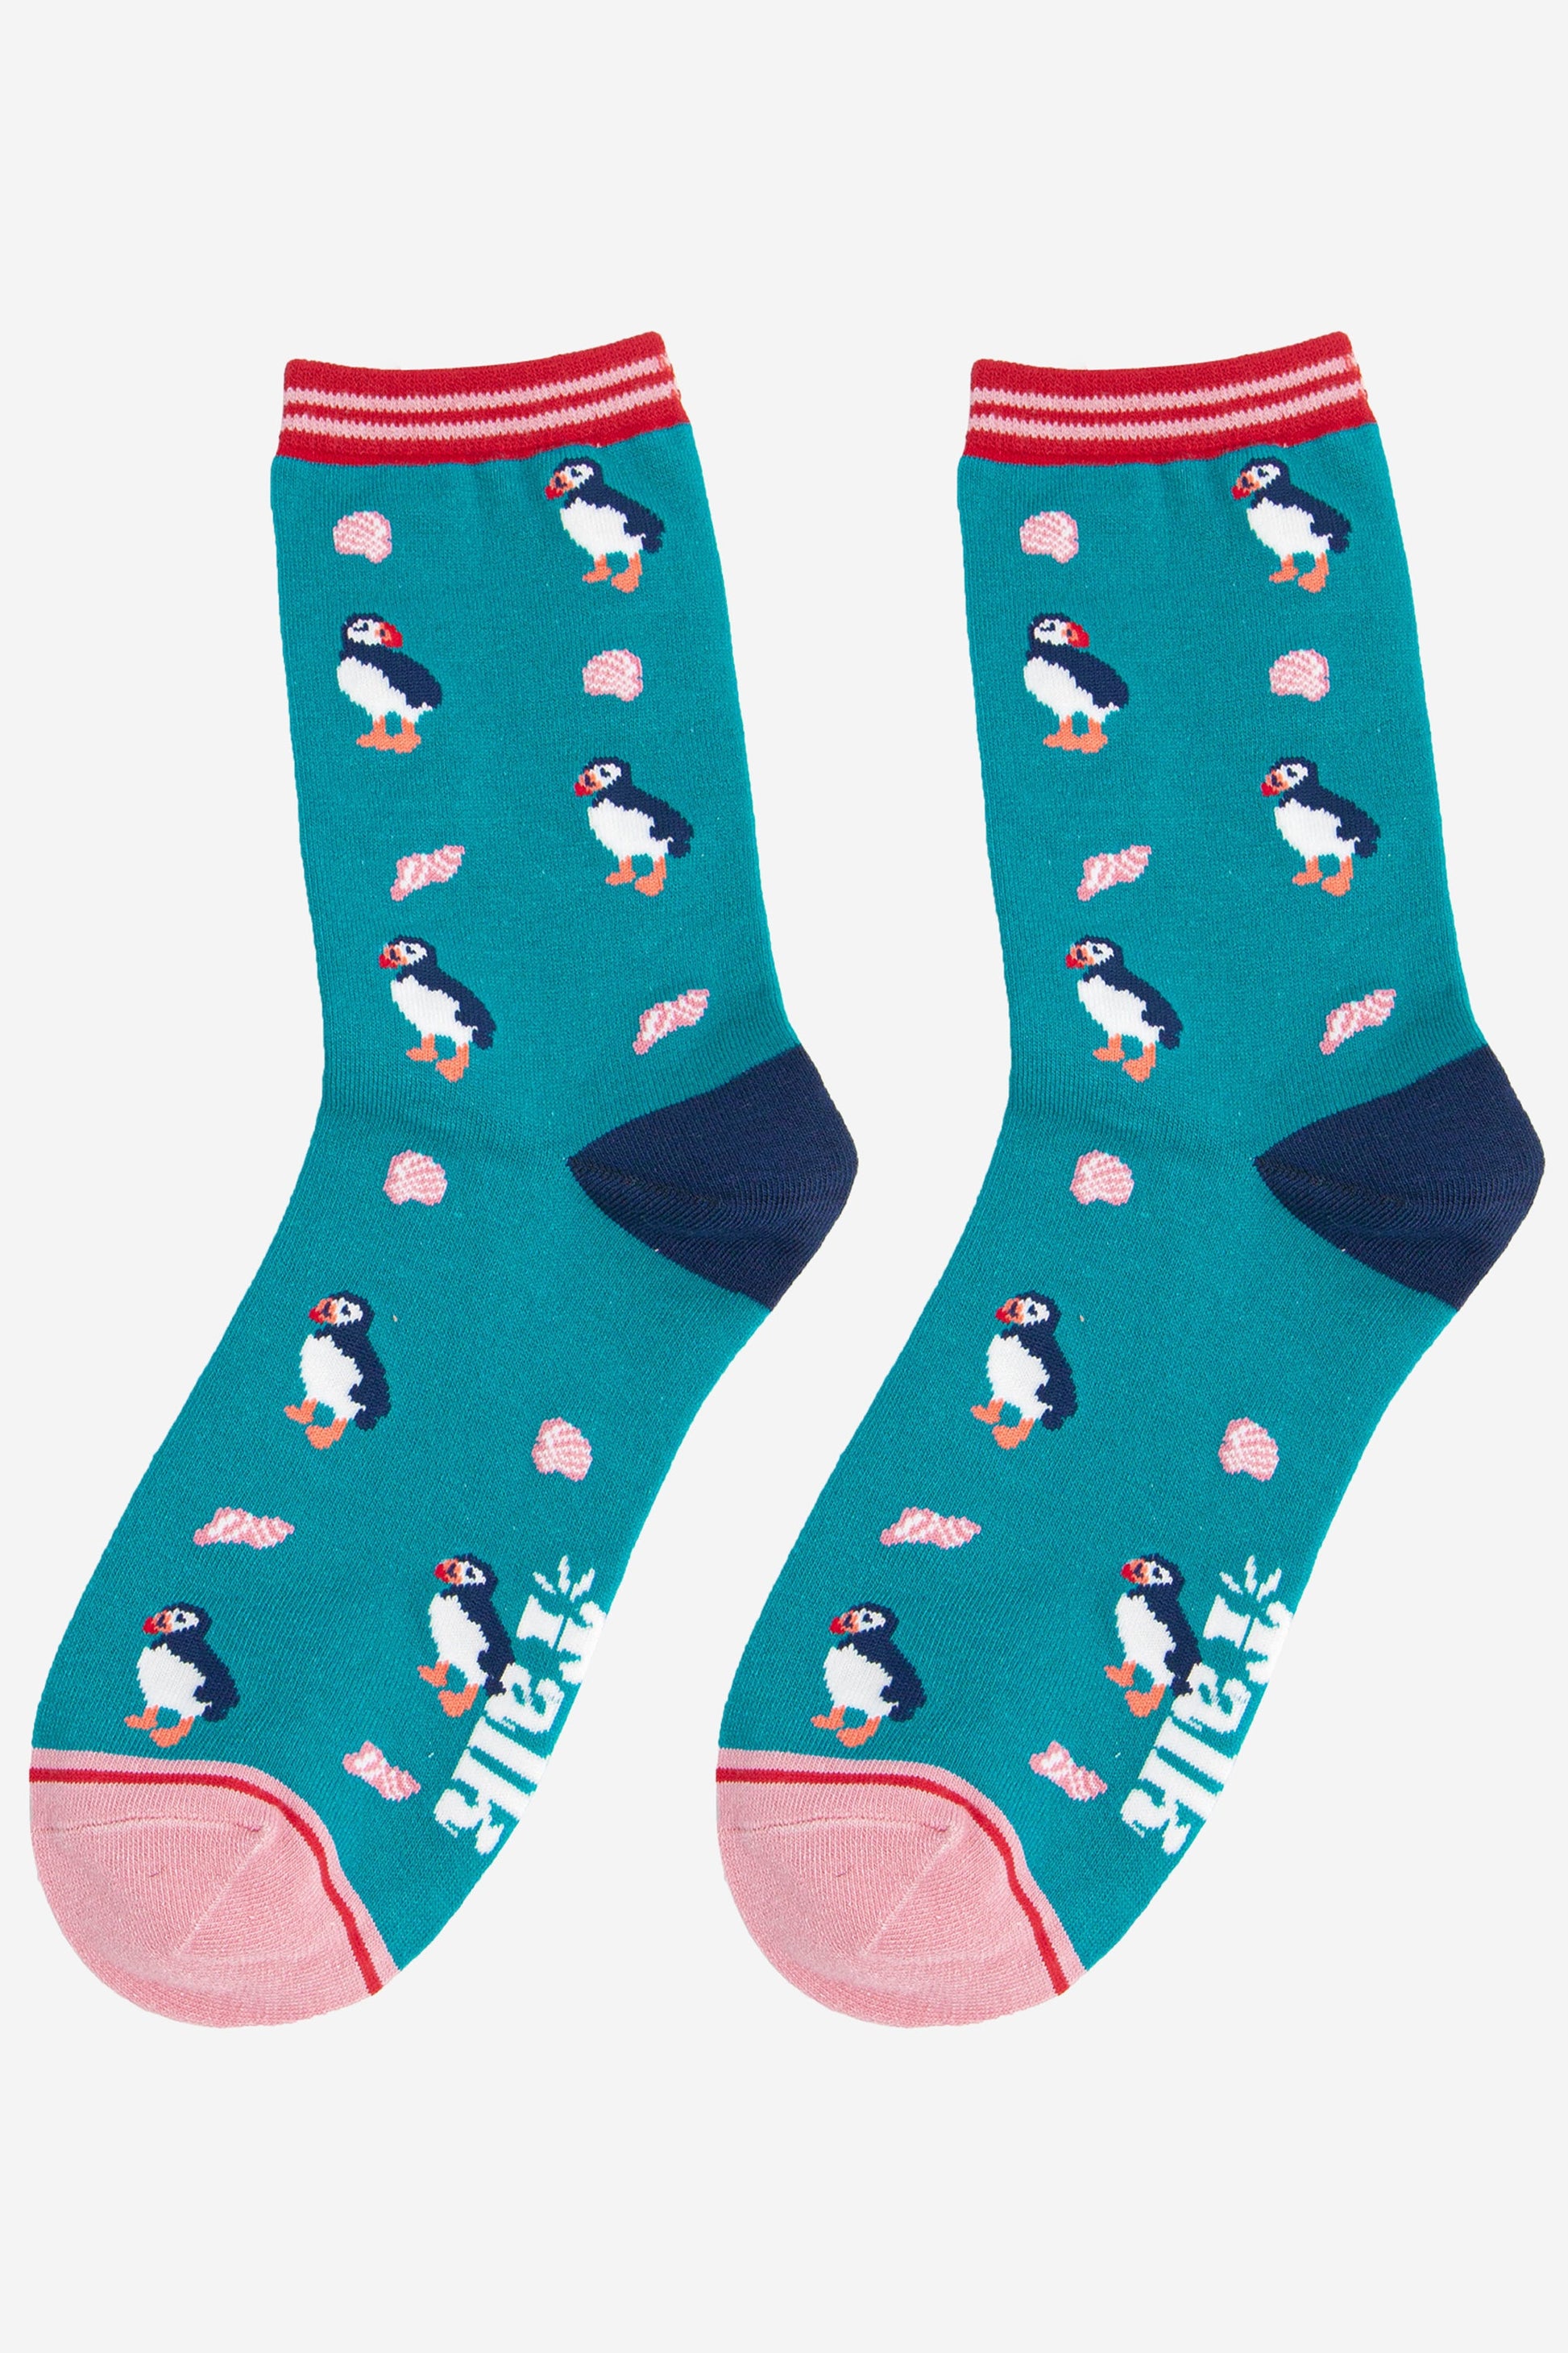 turquoise and pink bamboo ankle socks featuring puffins and seashells